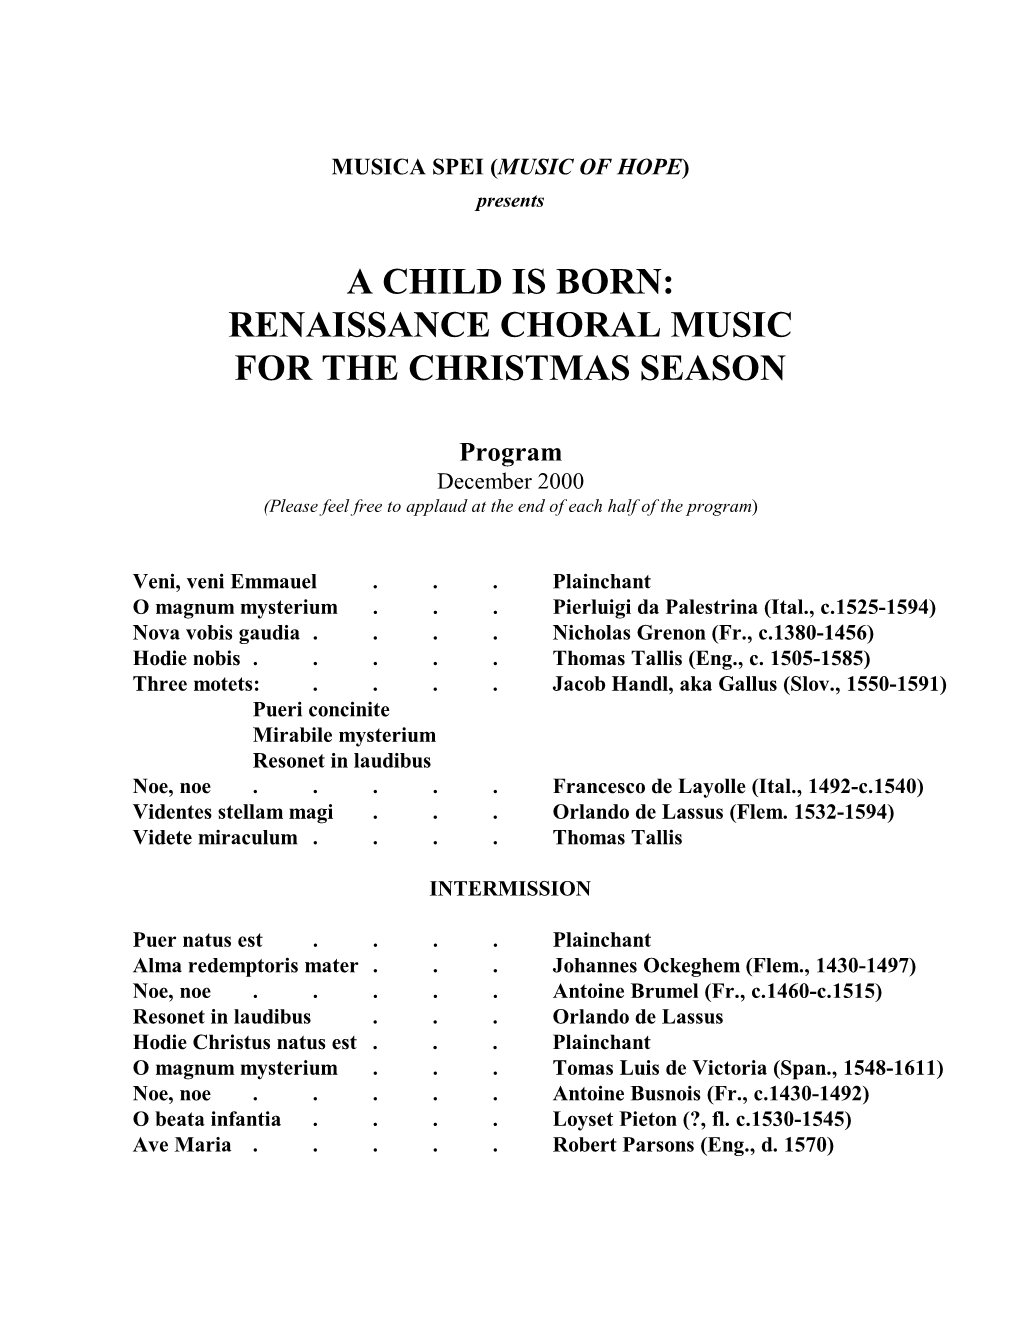 A Child Is Born: Renaissance Choral Music for the Christmas Season